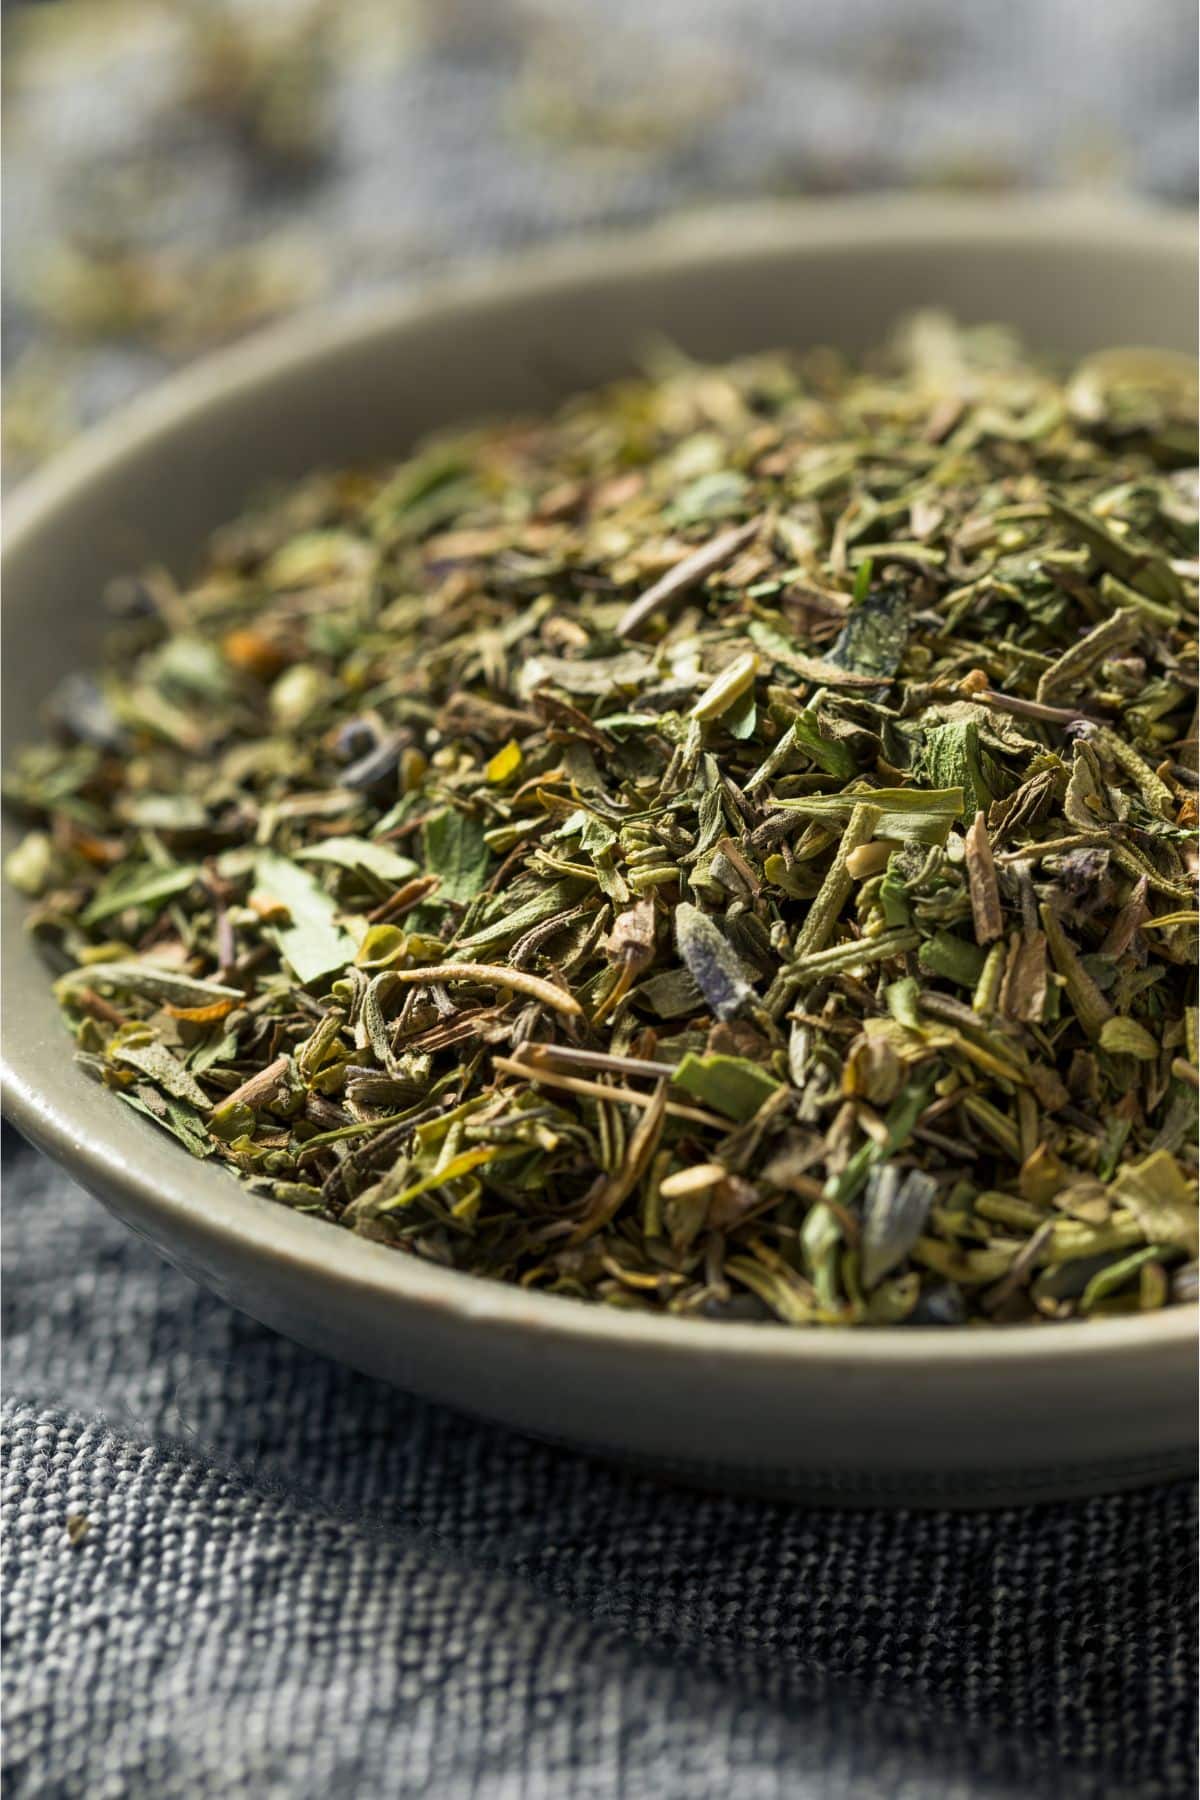 Herbes de Provence with thyme, lavender and rosemary.